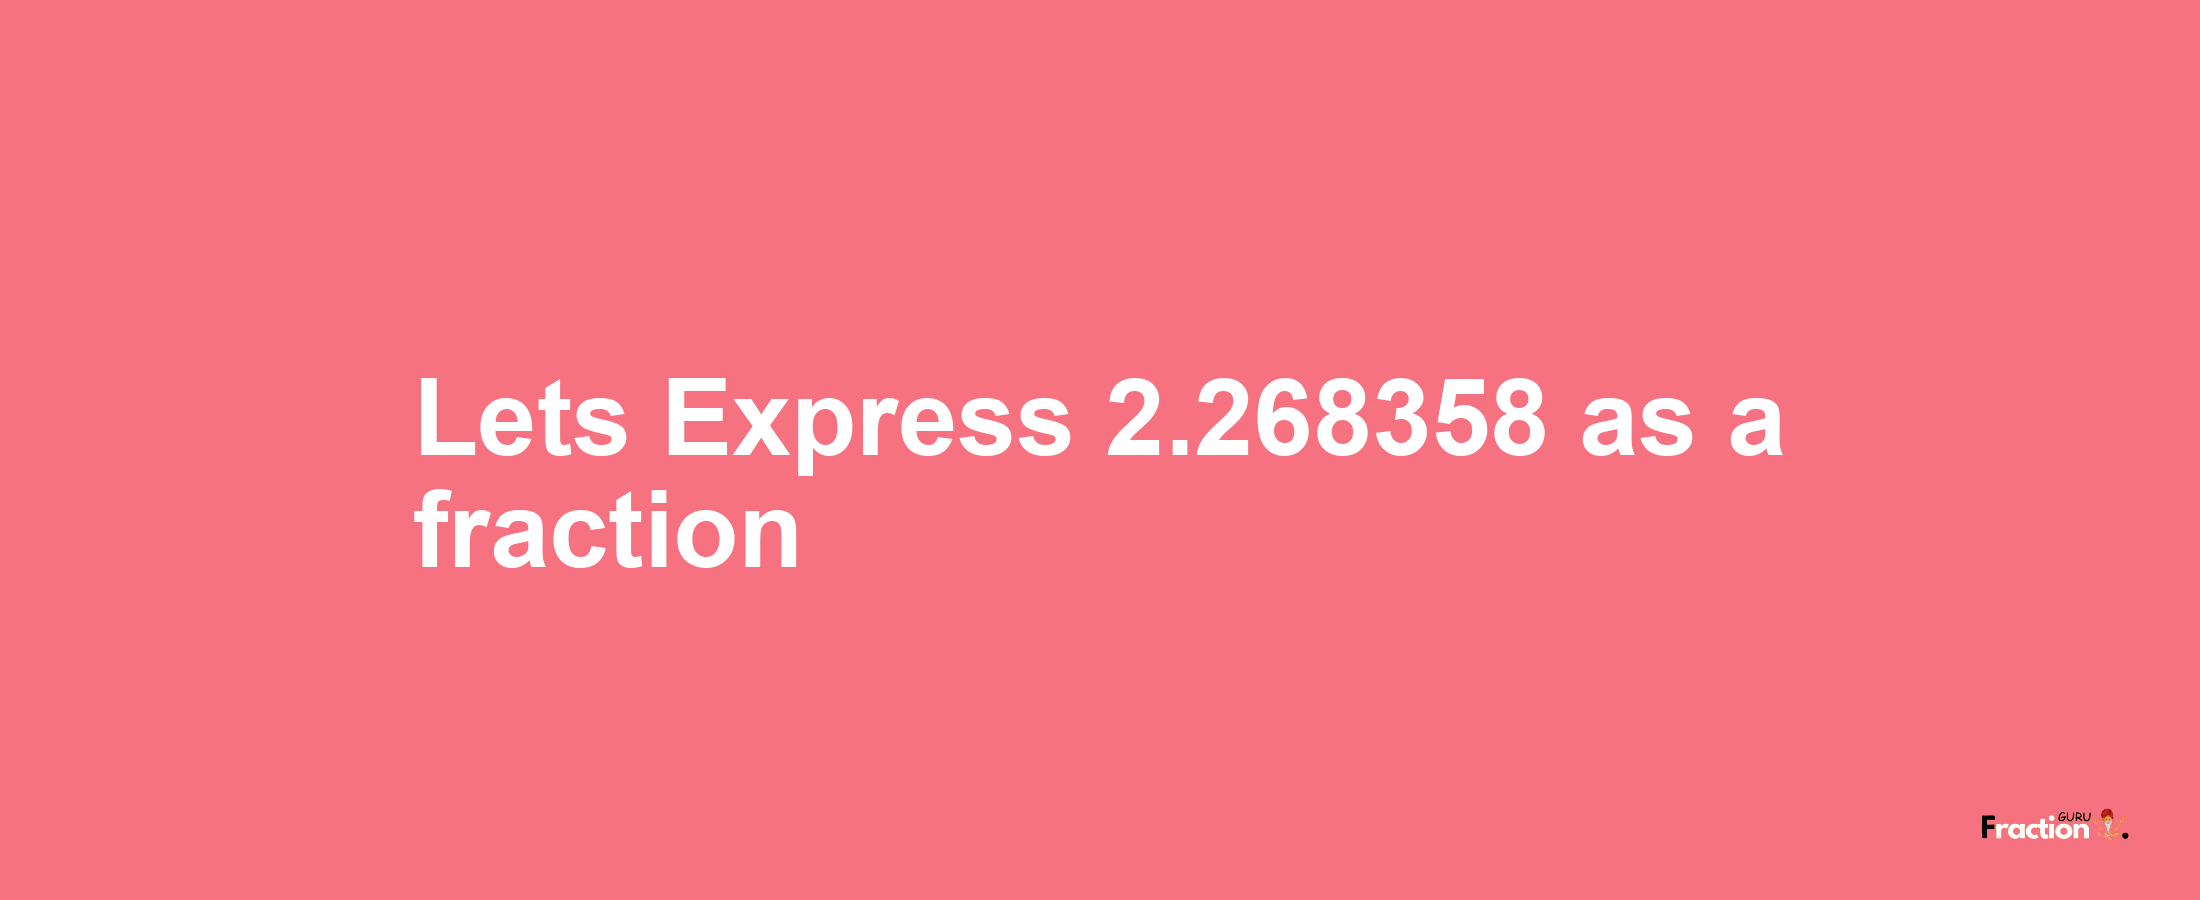 Lets Express 2.268358 as afraction